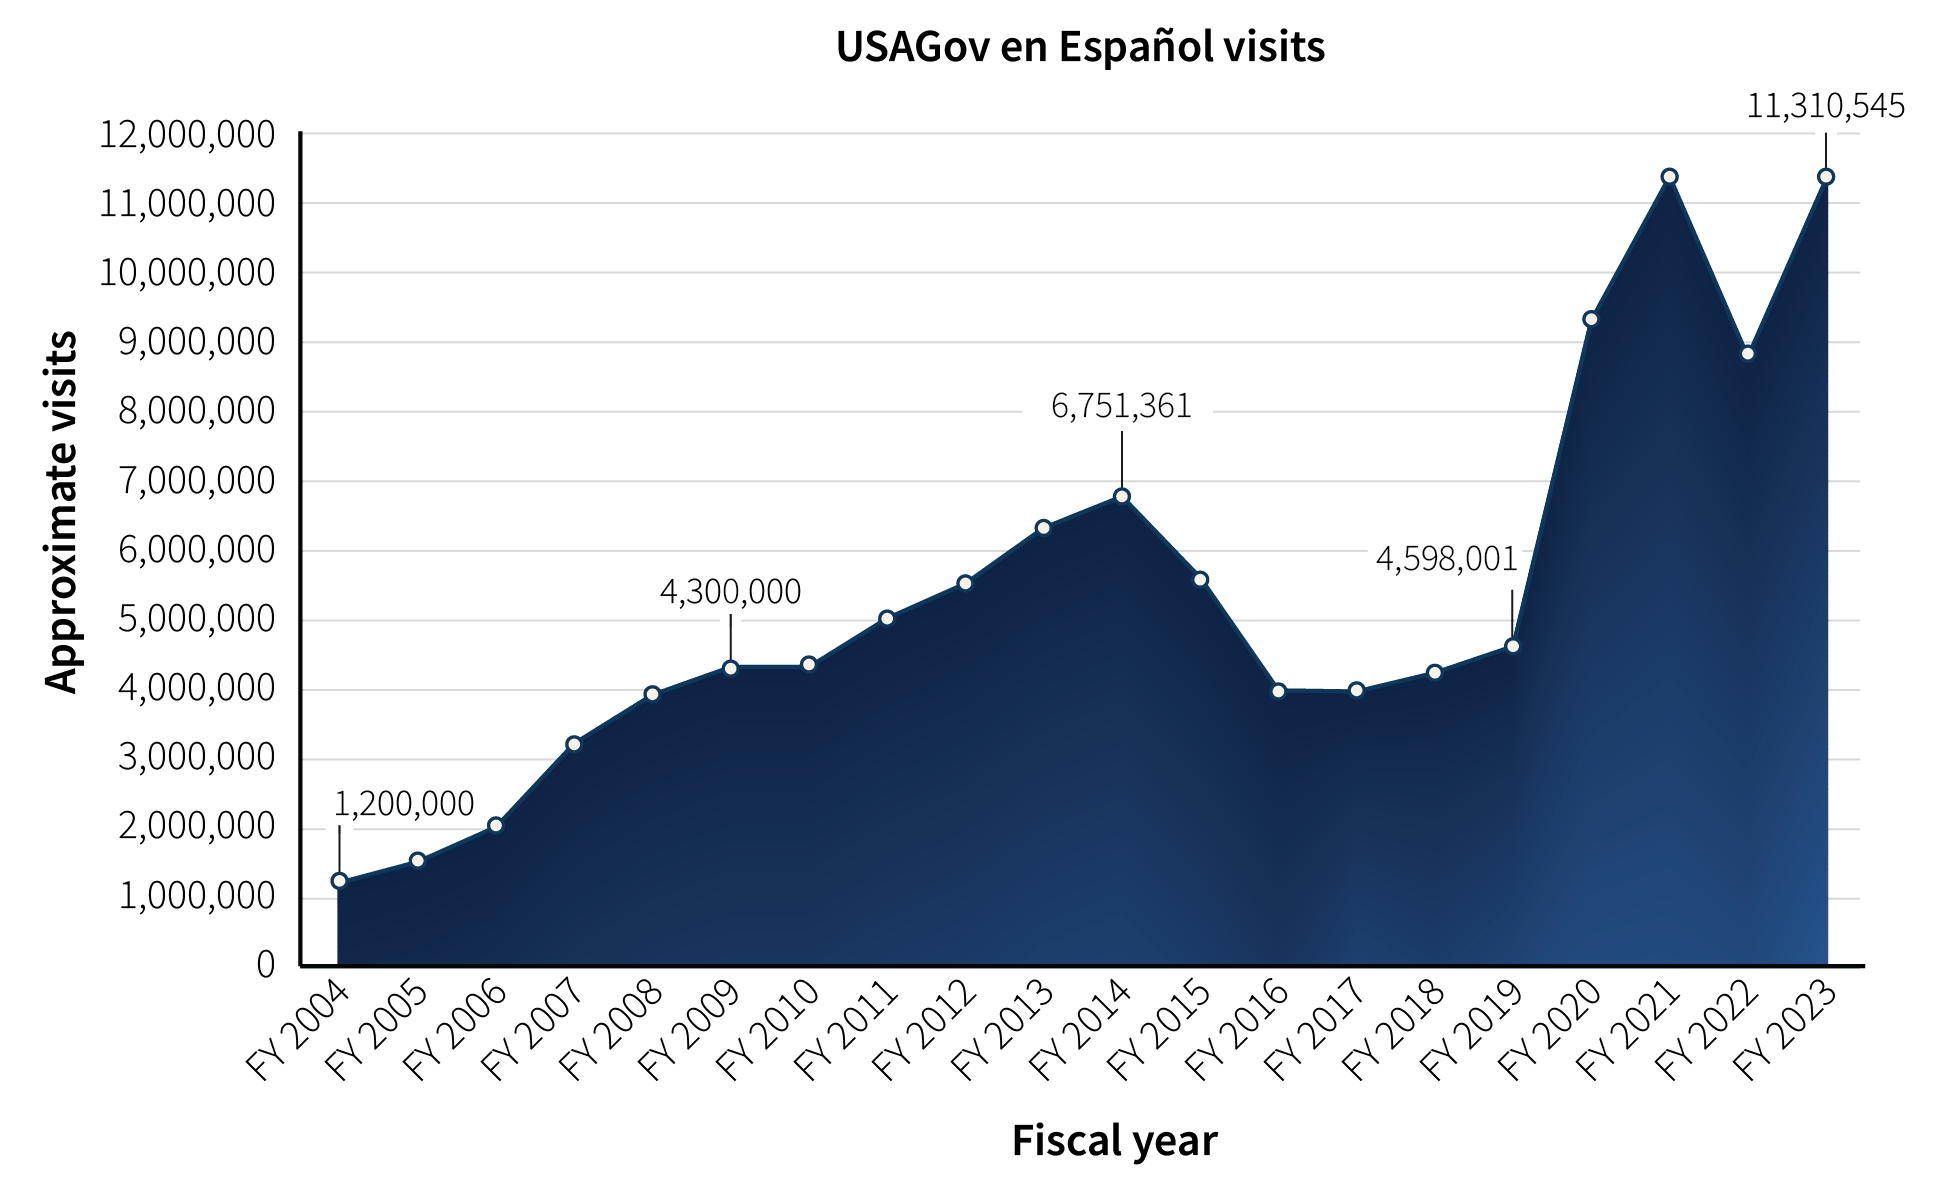 Line graph showing total visits to USAGov en Español organized by fiscal year, showing spikes at key points over 20 years, including FY2004, FY2009, FY2014, FY2019, and FY2023.